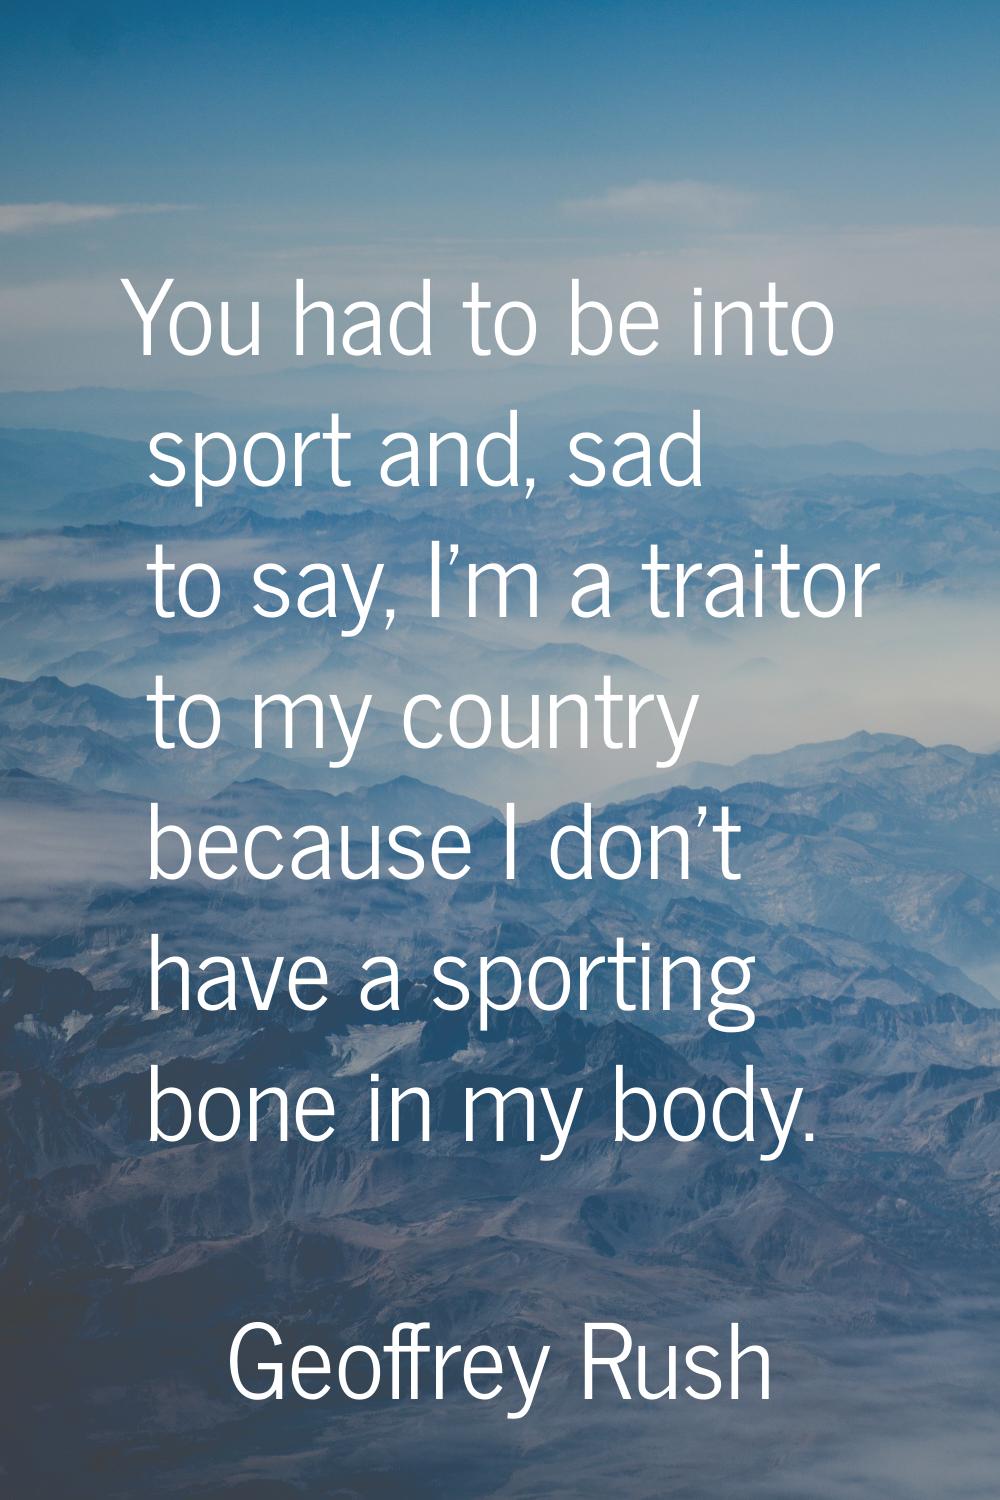 You had to be into sport and, sad to say, I'm a traitor to my country because I don't have a sporti